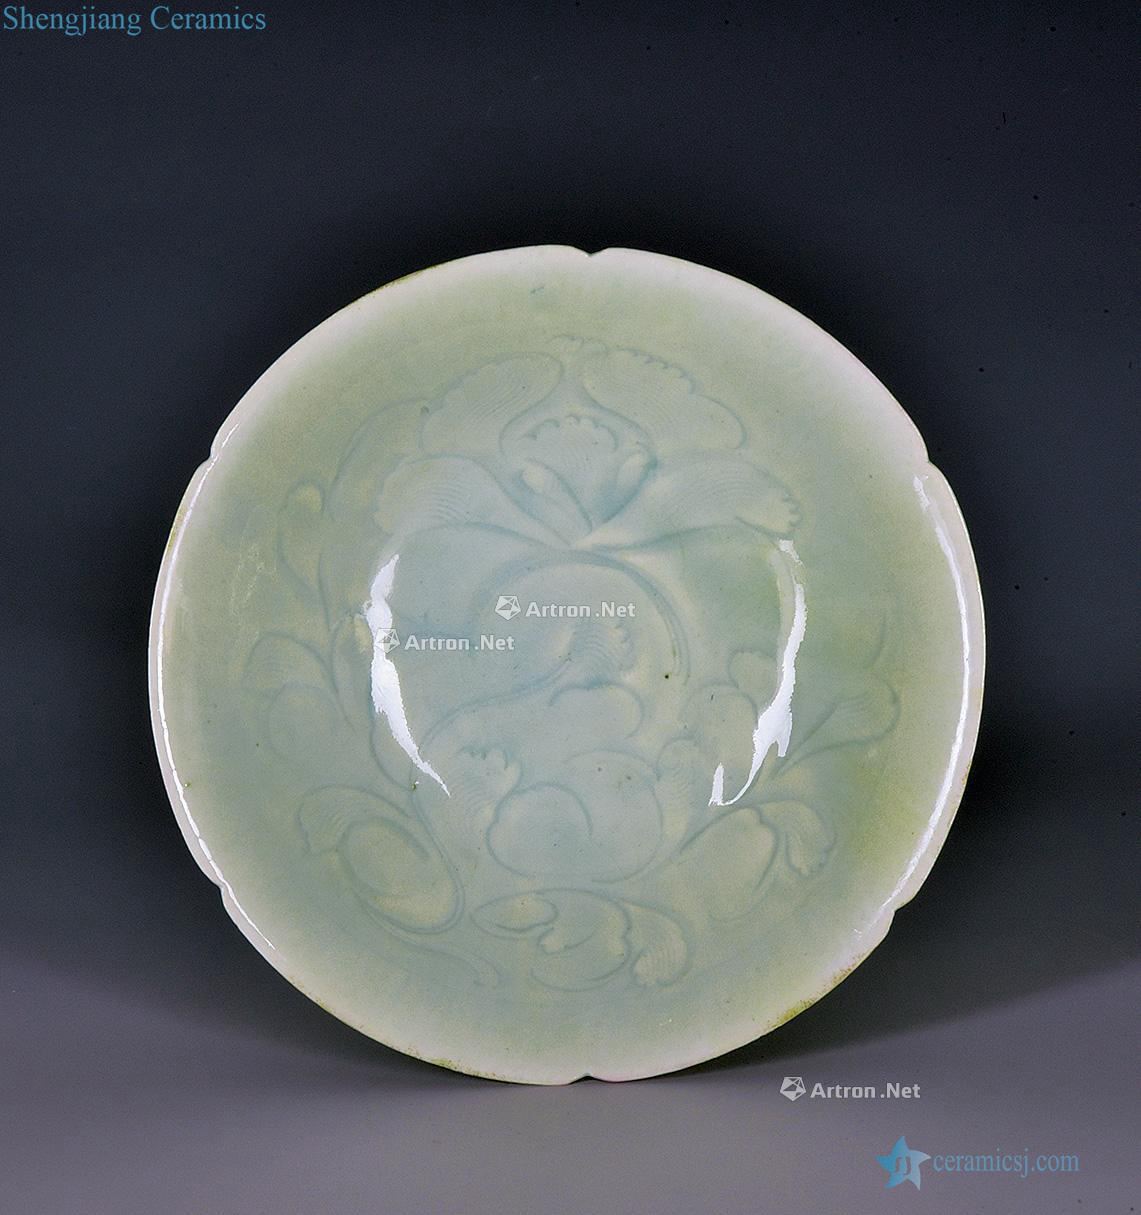 The southern song dynasty Left kiln green white glazed carved kwai mouth bowl